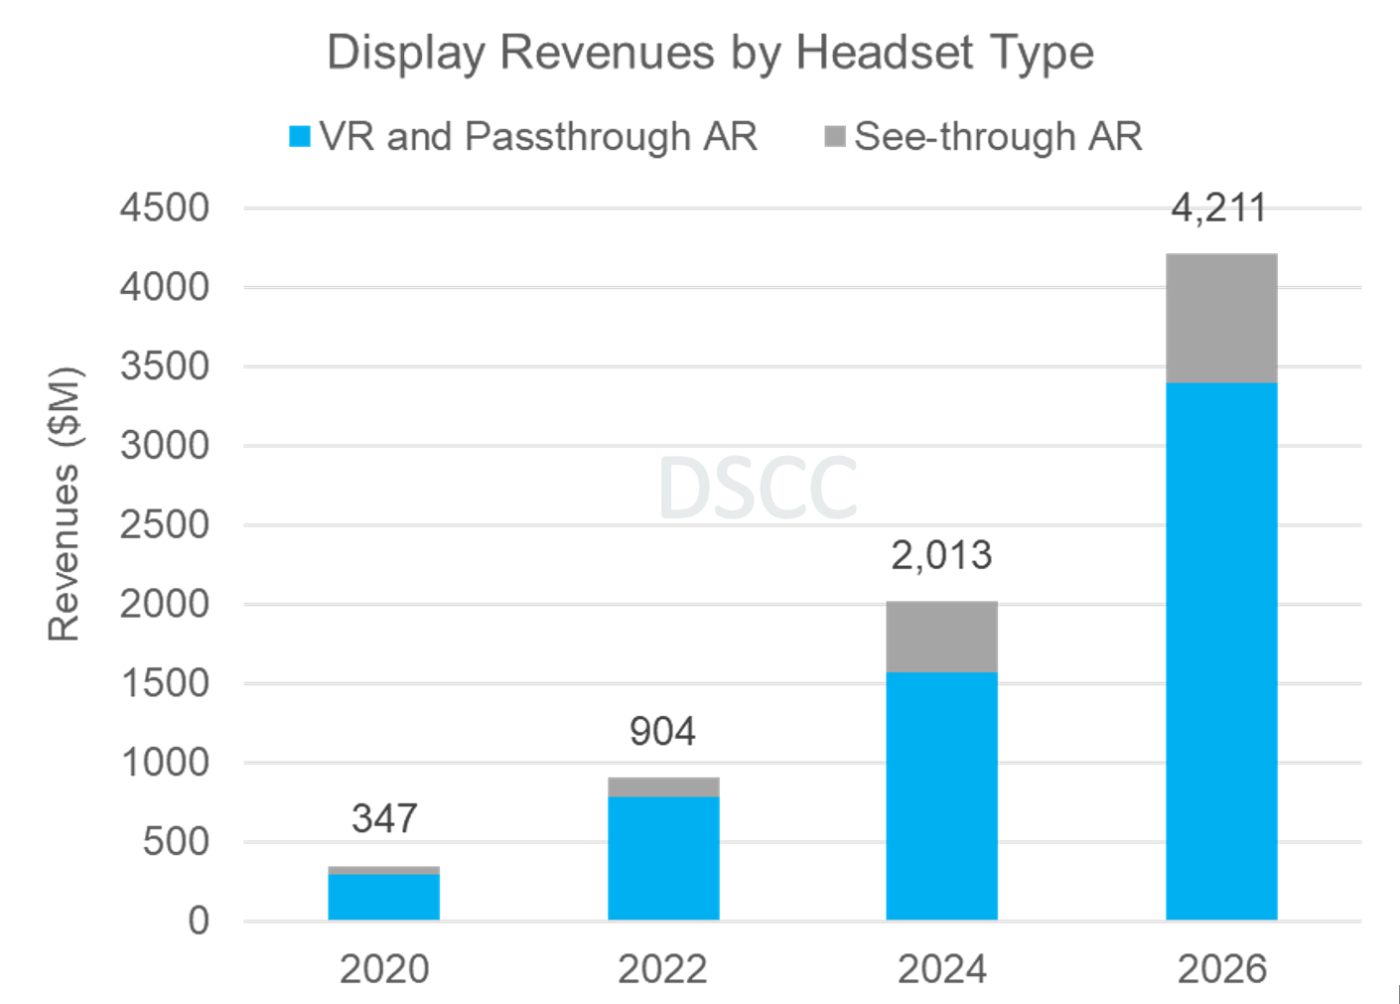 Source: Augmented and Virtual Reality Display Technologies and Market Report